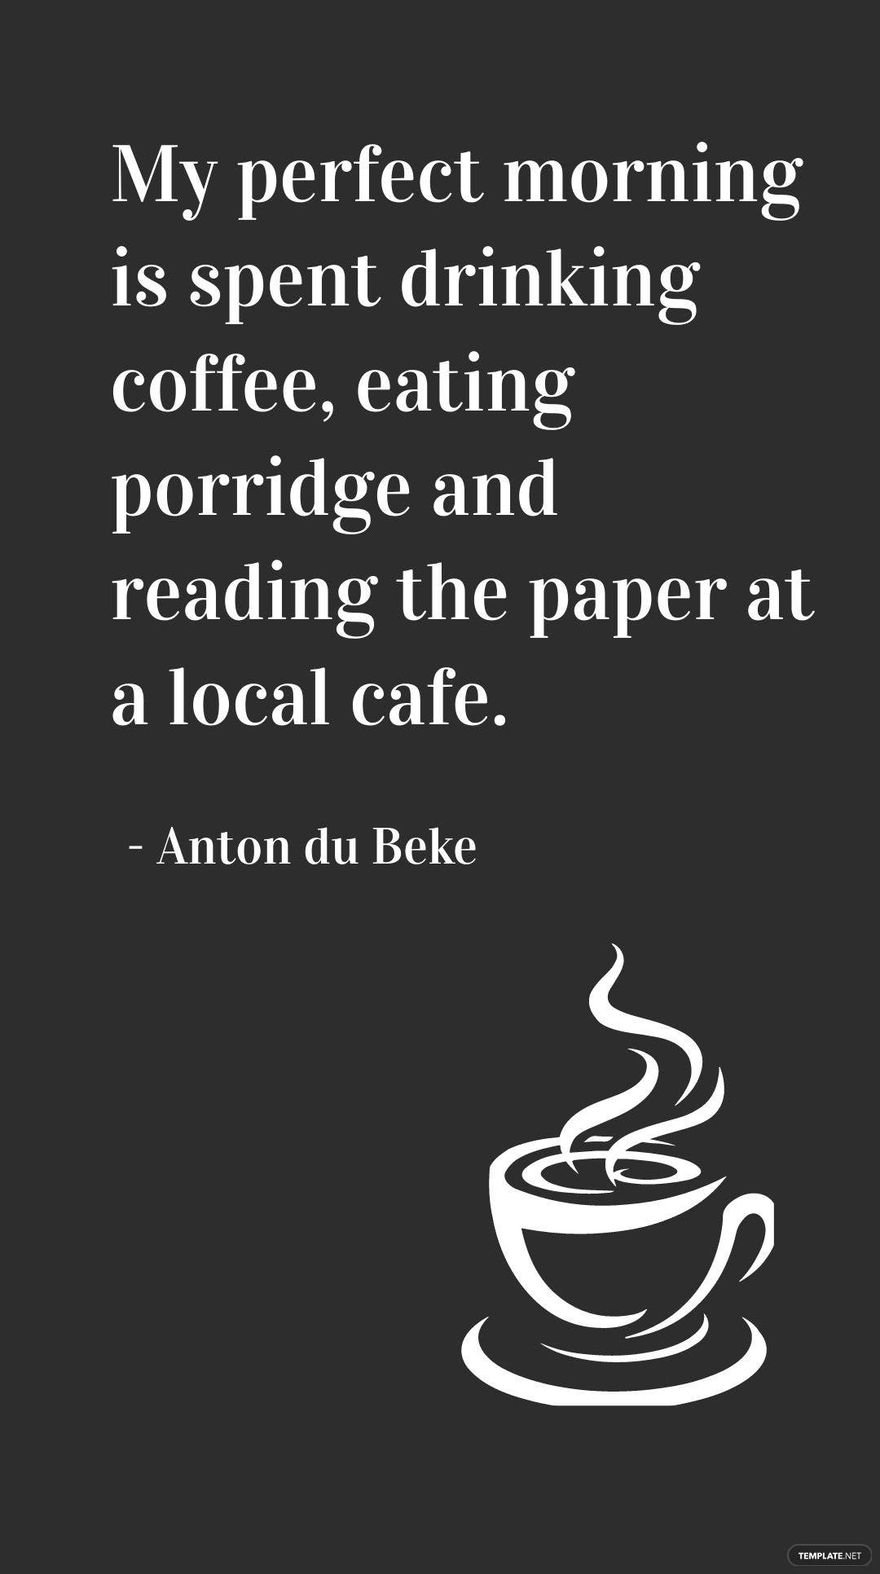 Free Anton du Beke - My perfect morning is spent drinking coffee, eating porridge and reading the paper at a local cafe. in JPG